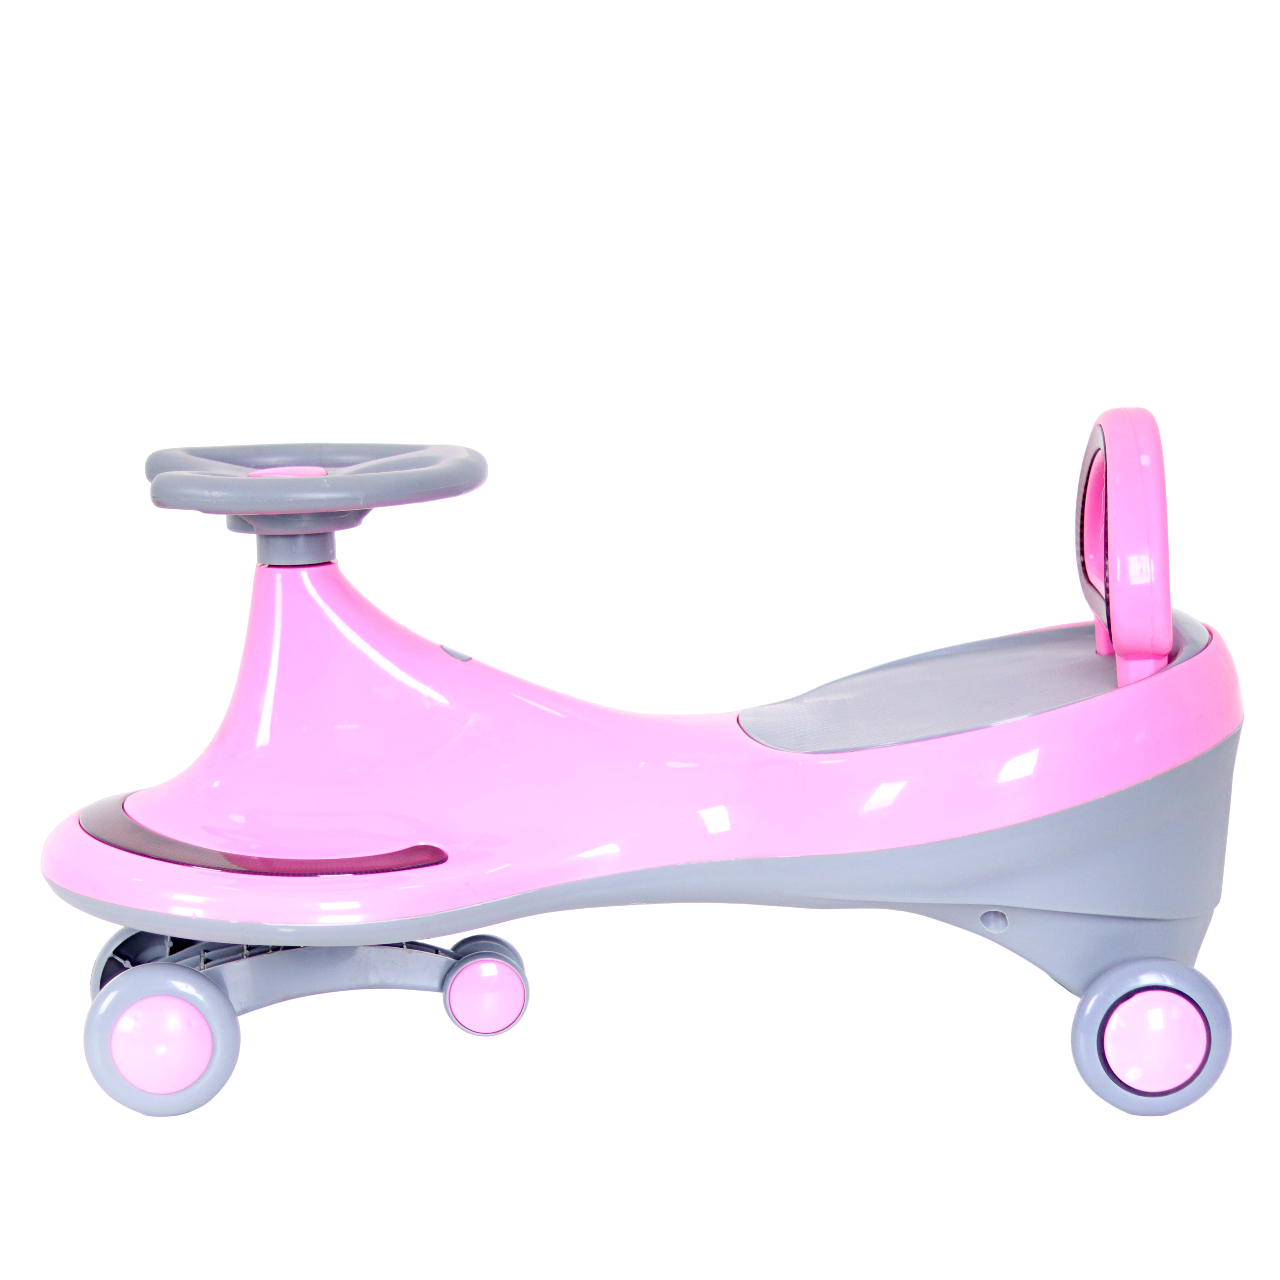 Luusa Twister Backlight : The Ultimate Ride-On Toy for Kids Aged 2-8 Years with Music and Lights